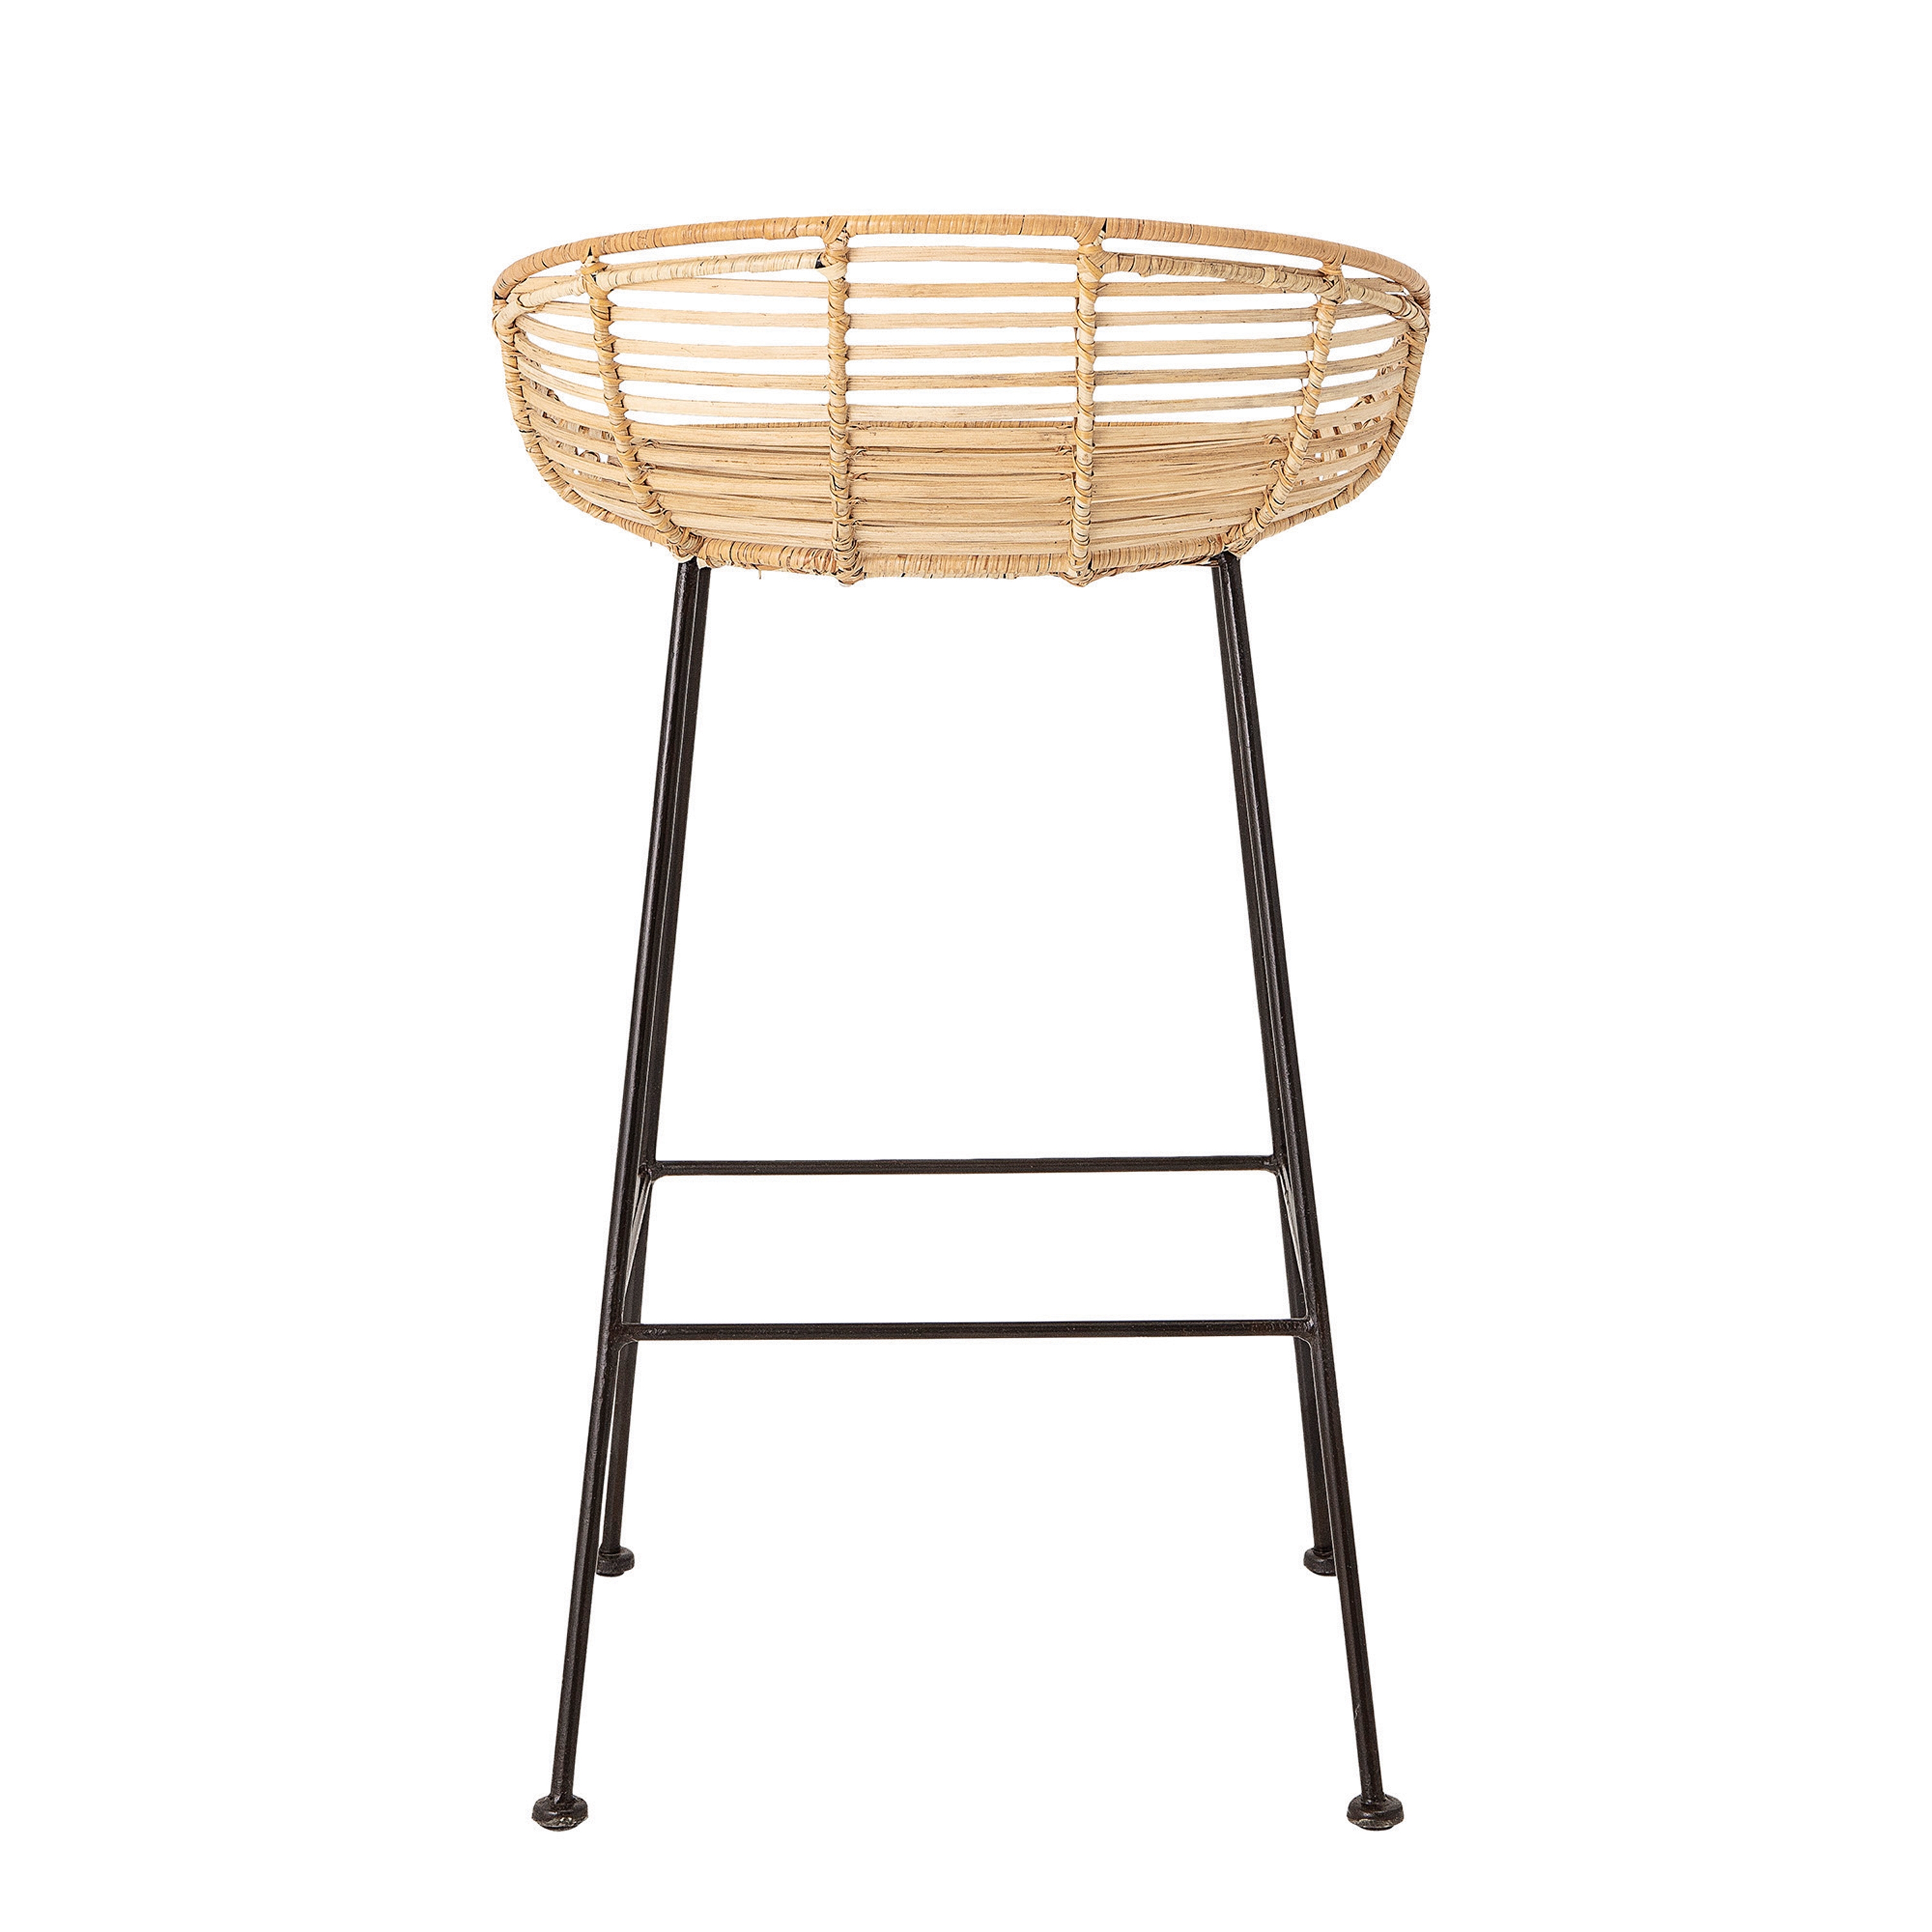 32"H Woven Rattan Bar Stool with Black Wrought Iron Legs - Image 0